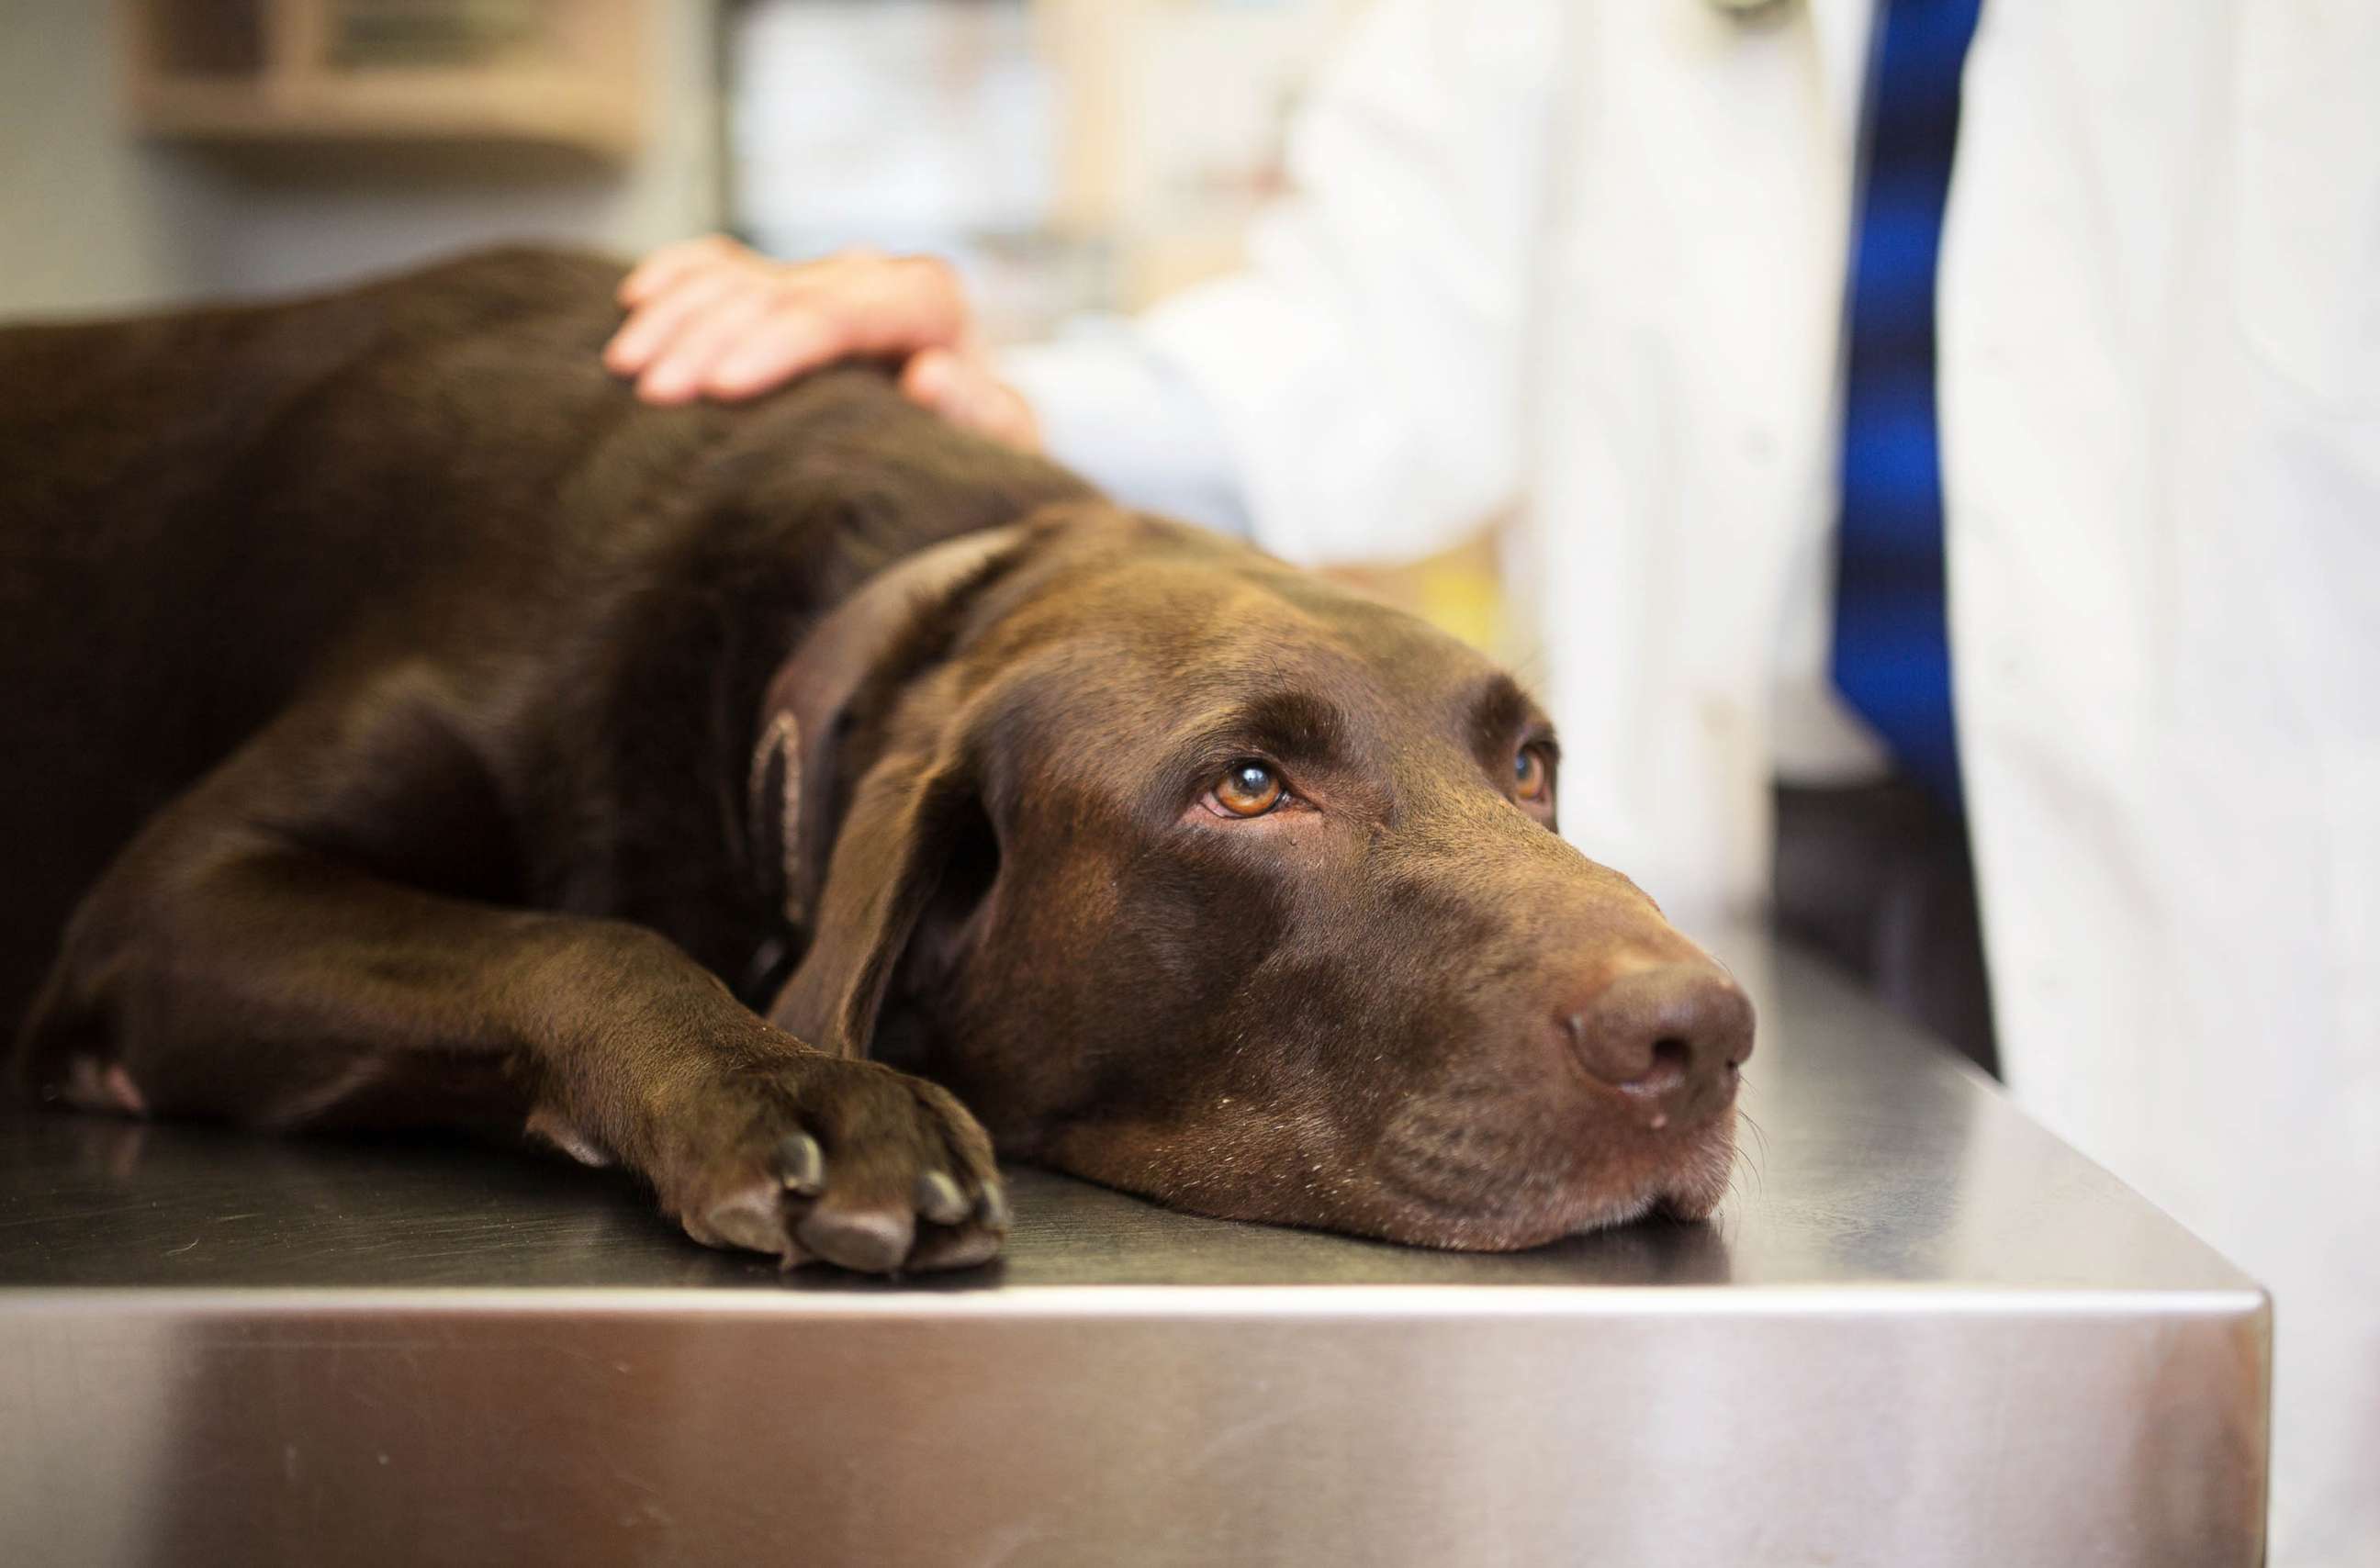 PHOTO: A labrador retriever is treated by a veterinarian in an undated stock image.